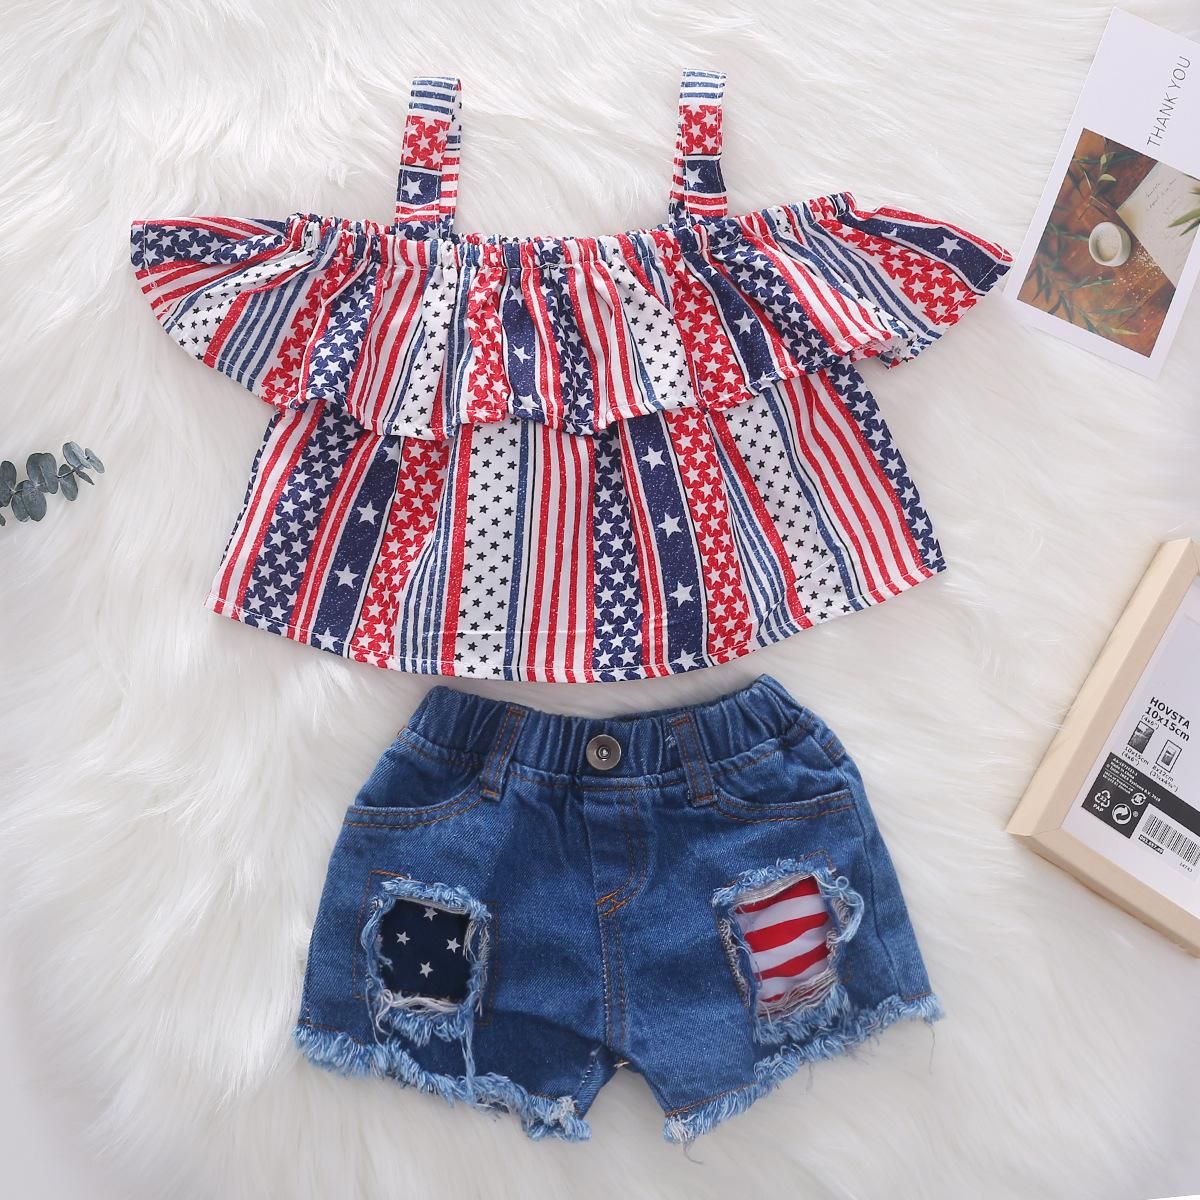 Details about   Summer Toddler Kid Girl Off Shoulder T shirt Bohemian Pant Clothes Outfits Set 